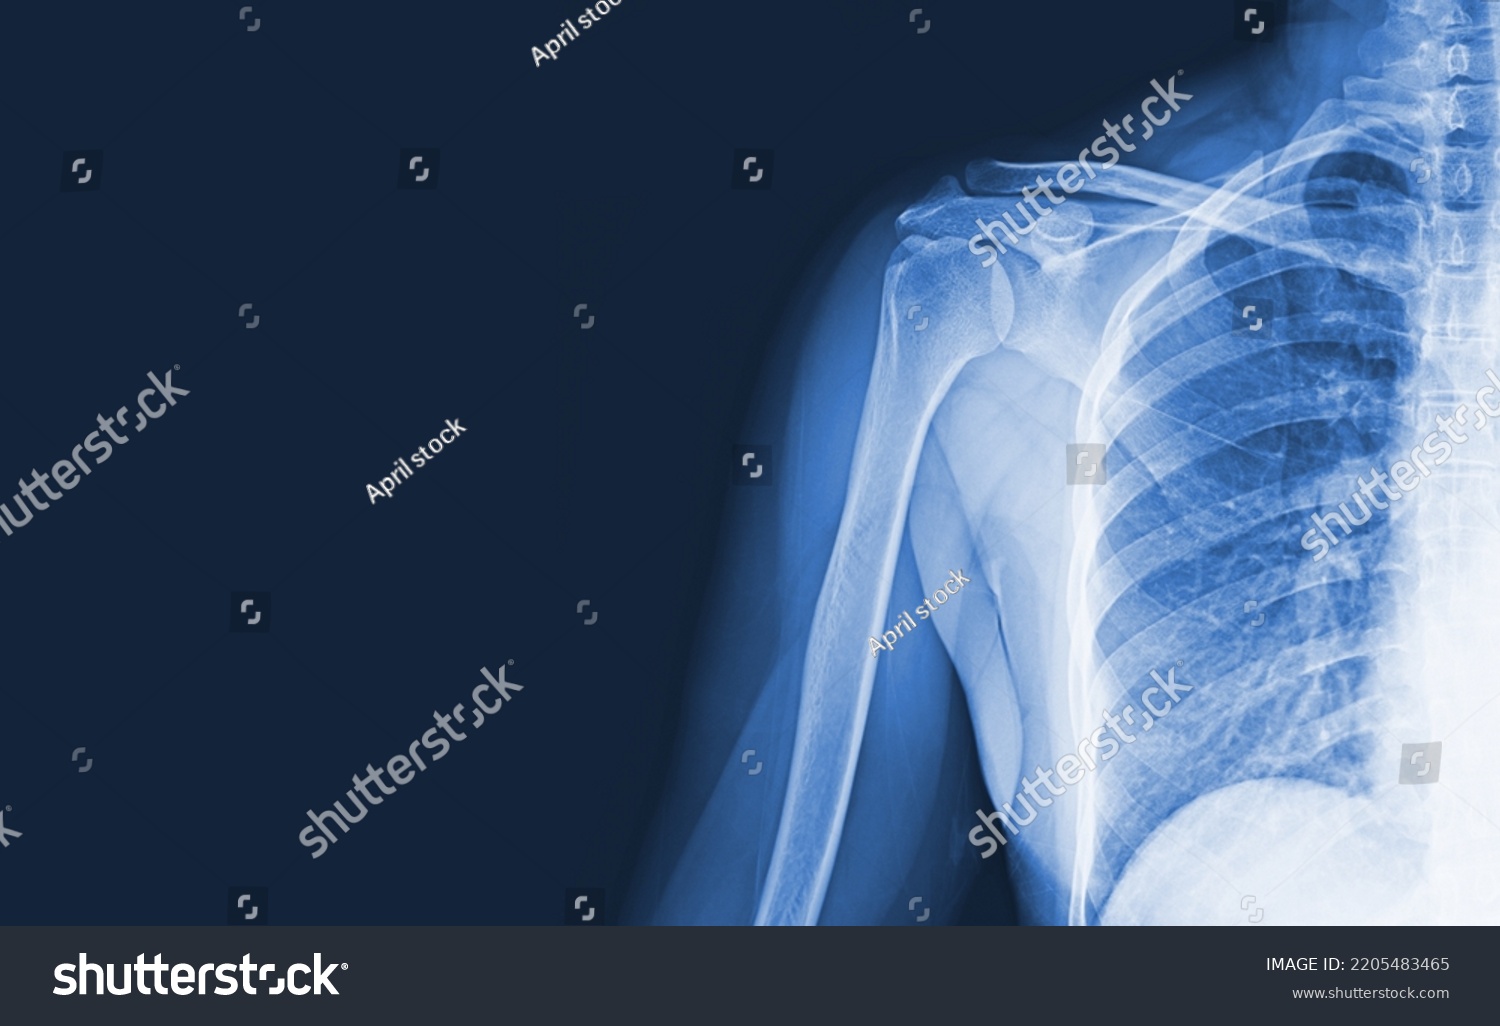 x-ray images of the shoulder joint to see injuries bones and tendons for a medical diagnosis.Medical image concept and copy space. #2205483465